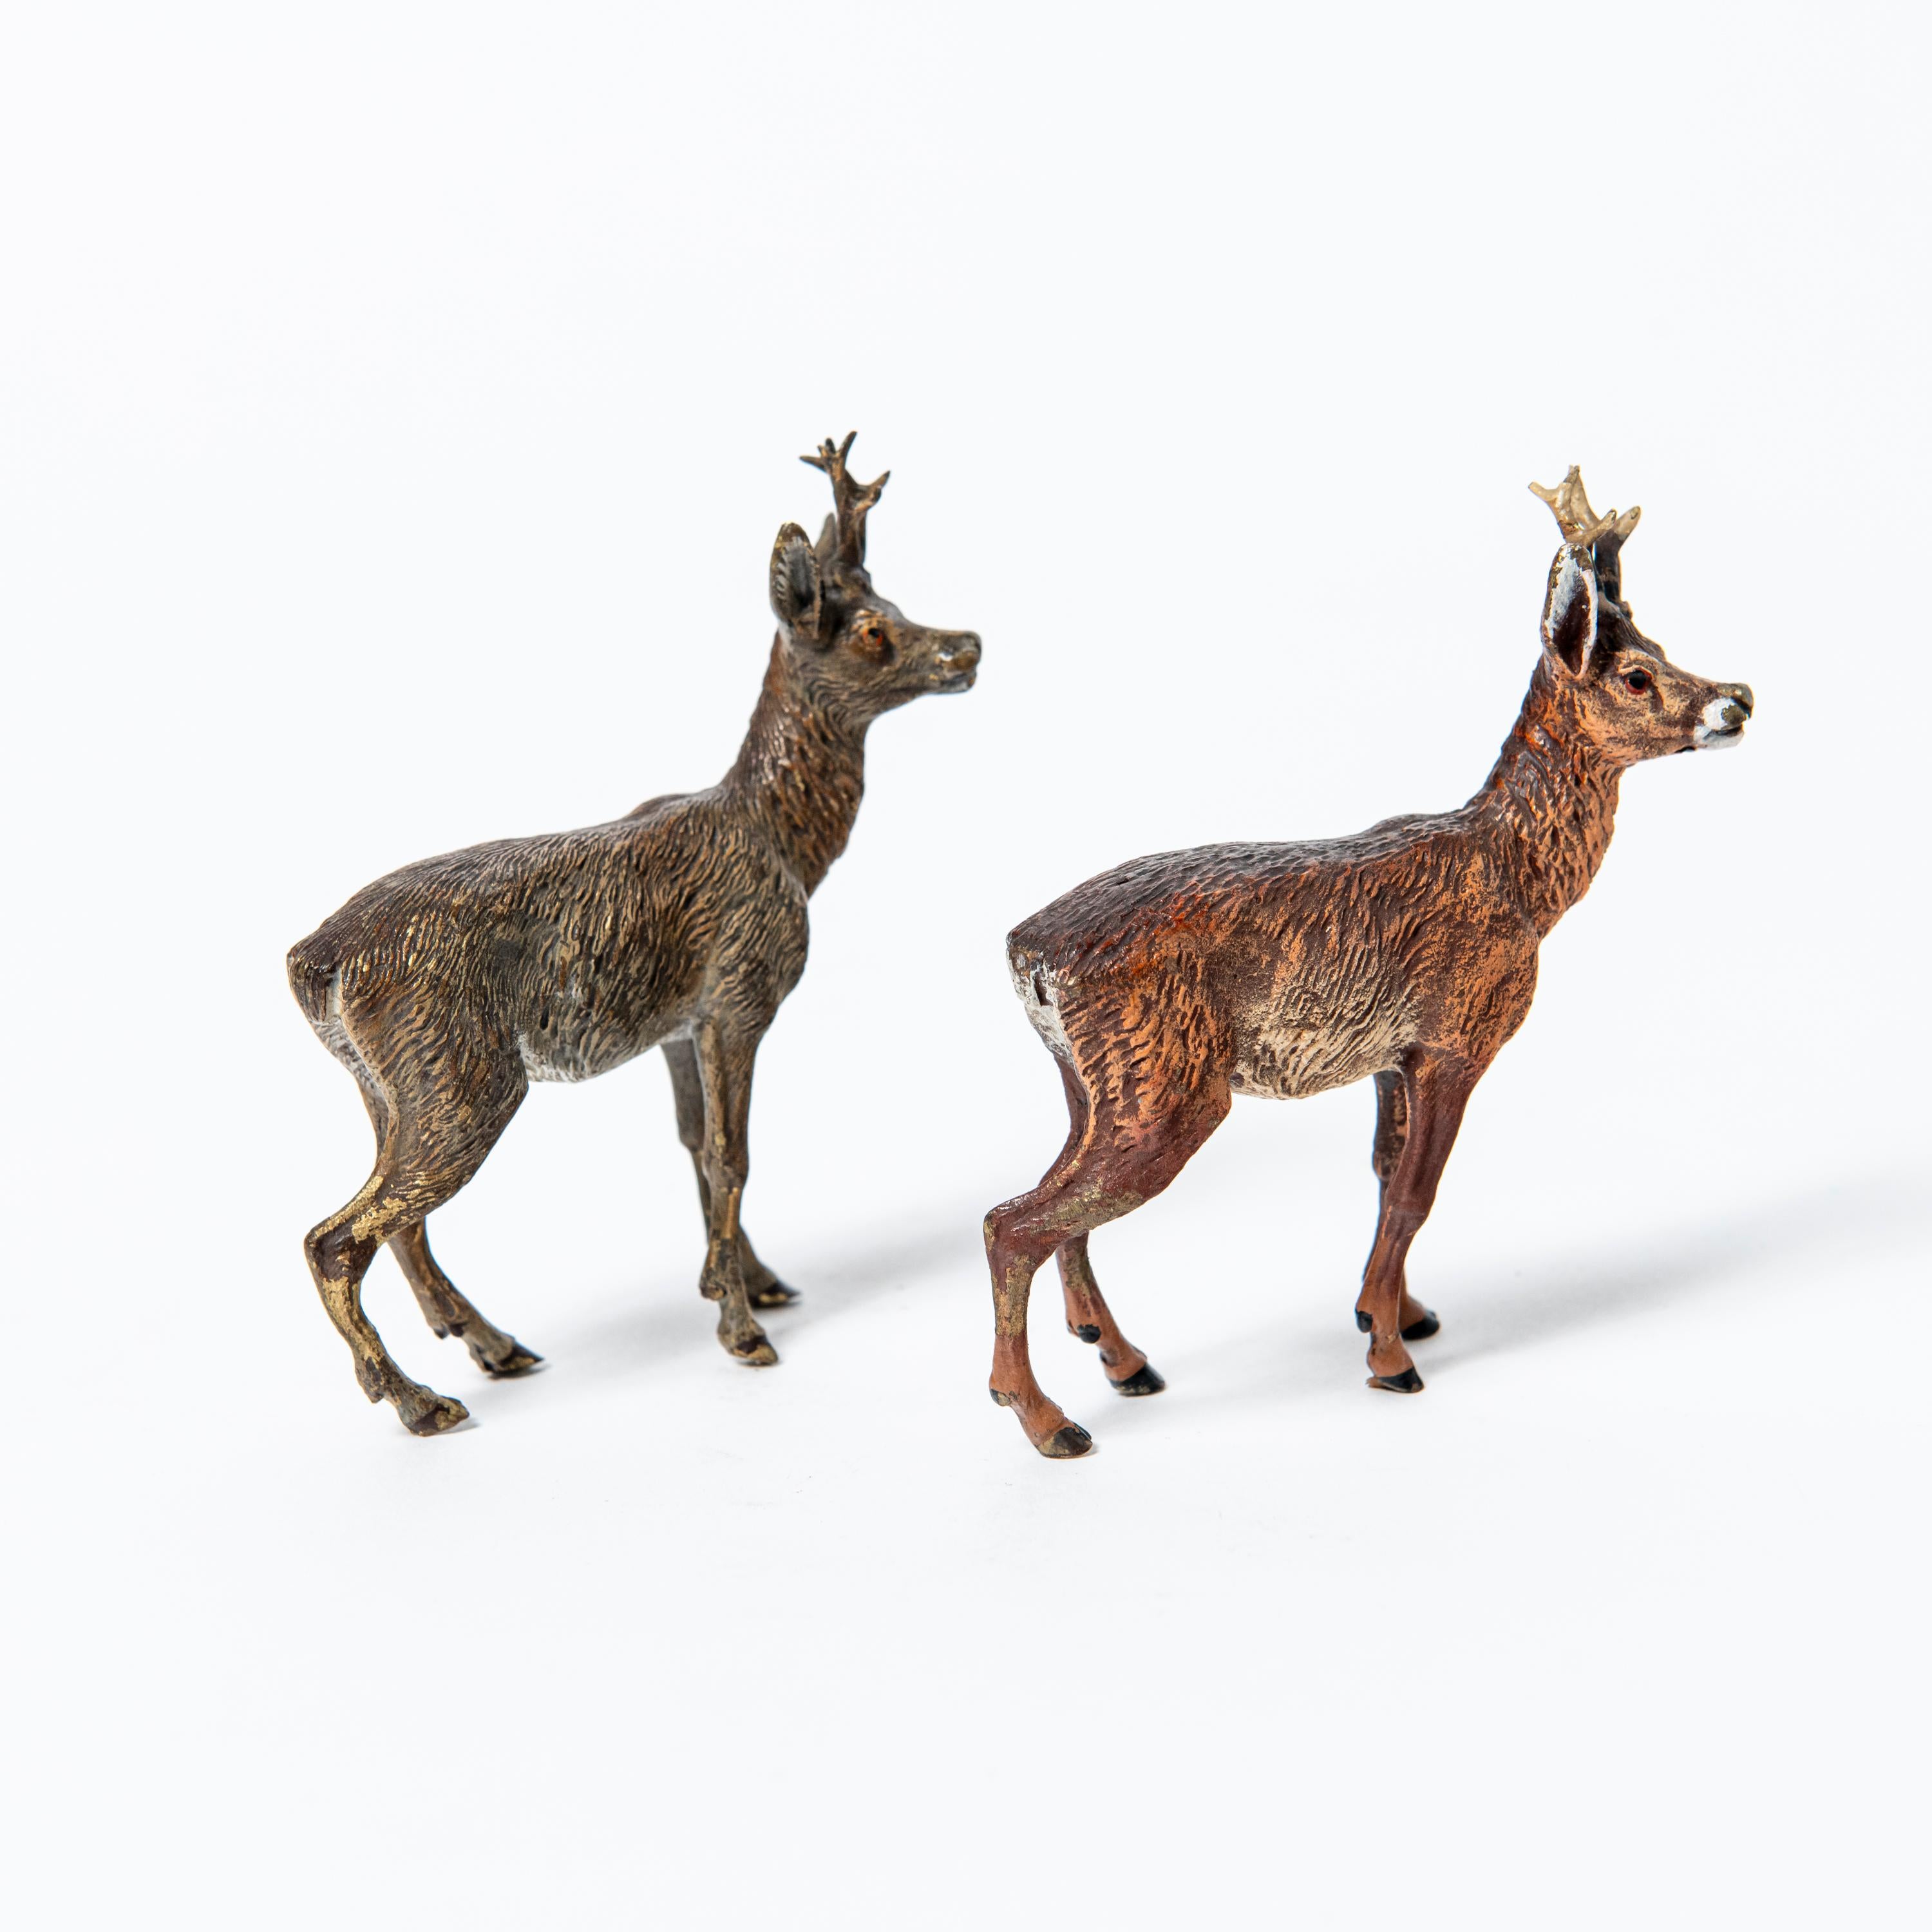 Pair of Cold-painted bronze deers sculpture attributed to Franz Bergmann. Austria, early 20th century.